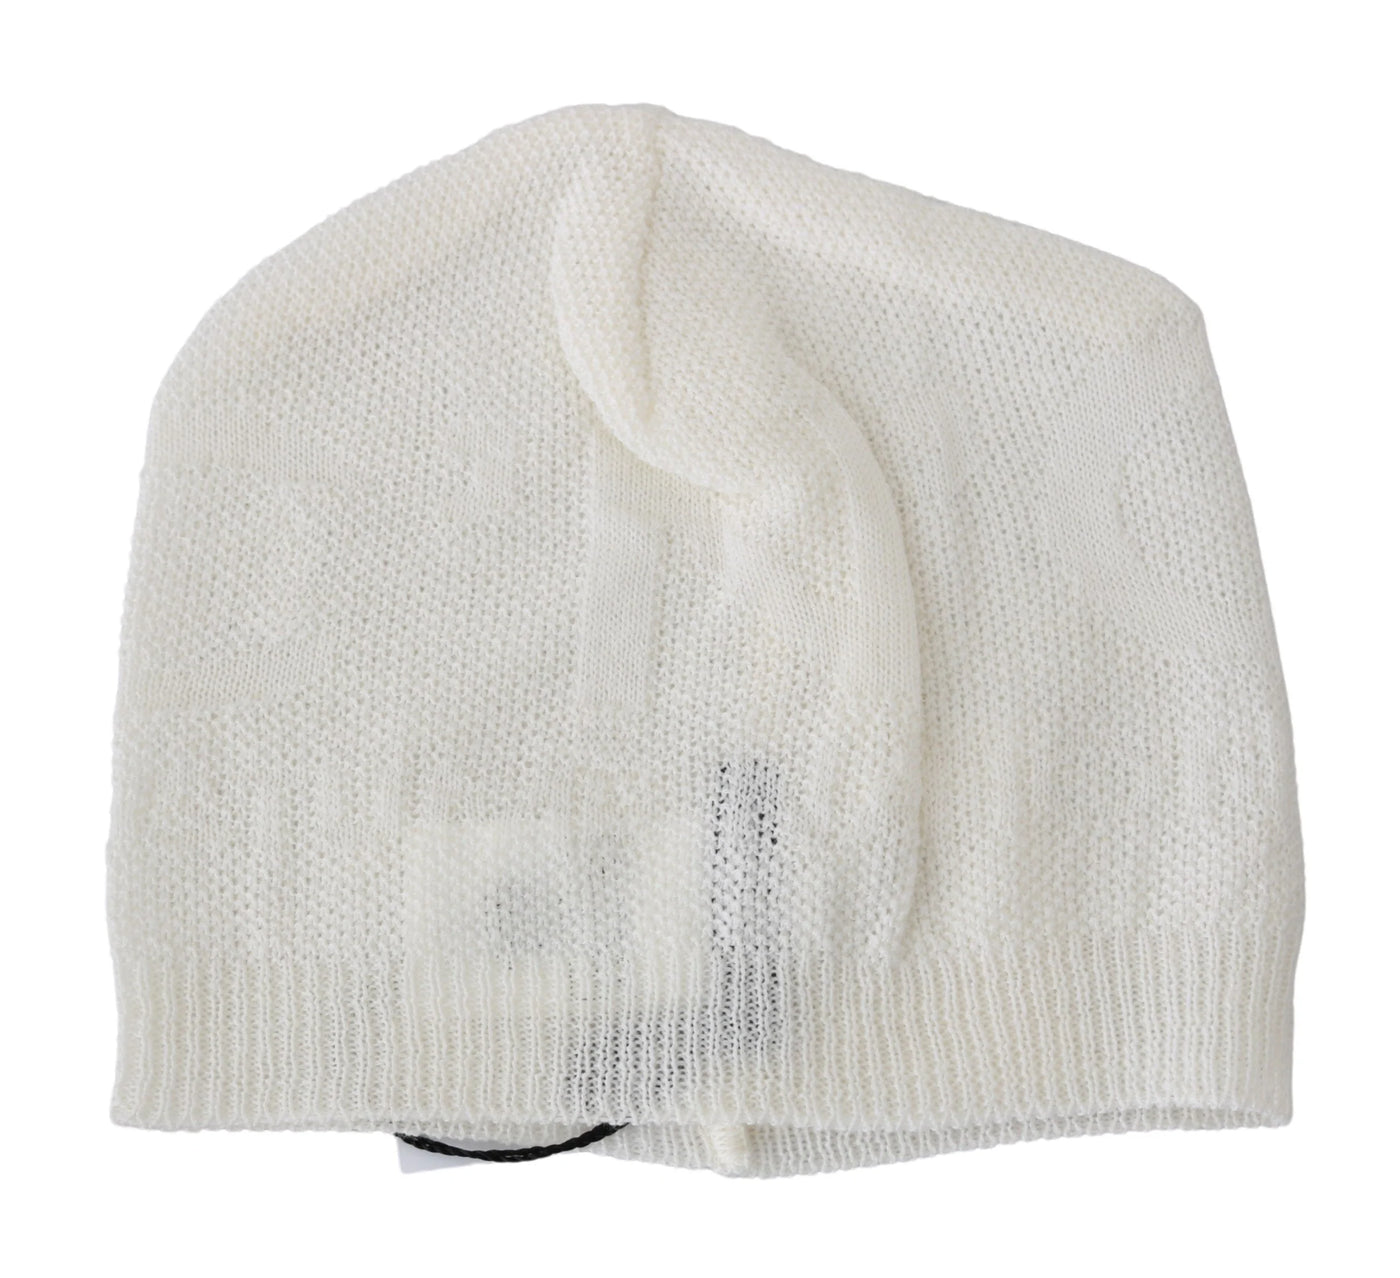 Dolce & Gabbana Beanie White Wool Blend Branded Hat #men, Accessories - New Arrivals, Brand_Dolce & Gabbana, Catch, Dolce & Gabbana, feed-agegroup-adult, feed-color-white, feed-gender-male, feed-size-OS, Gender_Men, Hats & Caps - Men - Accessories, Kogan, White at SEYMAYKA